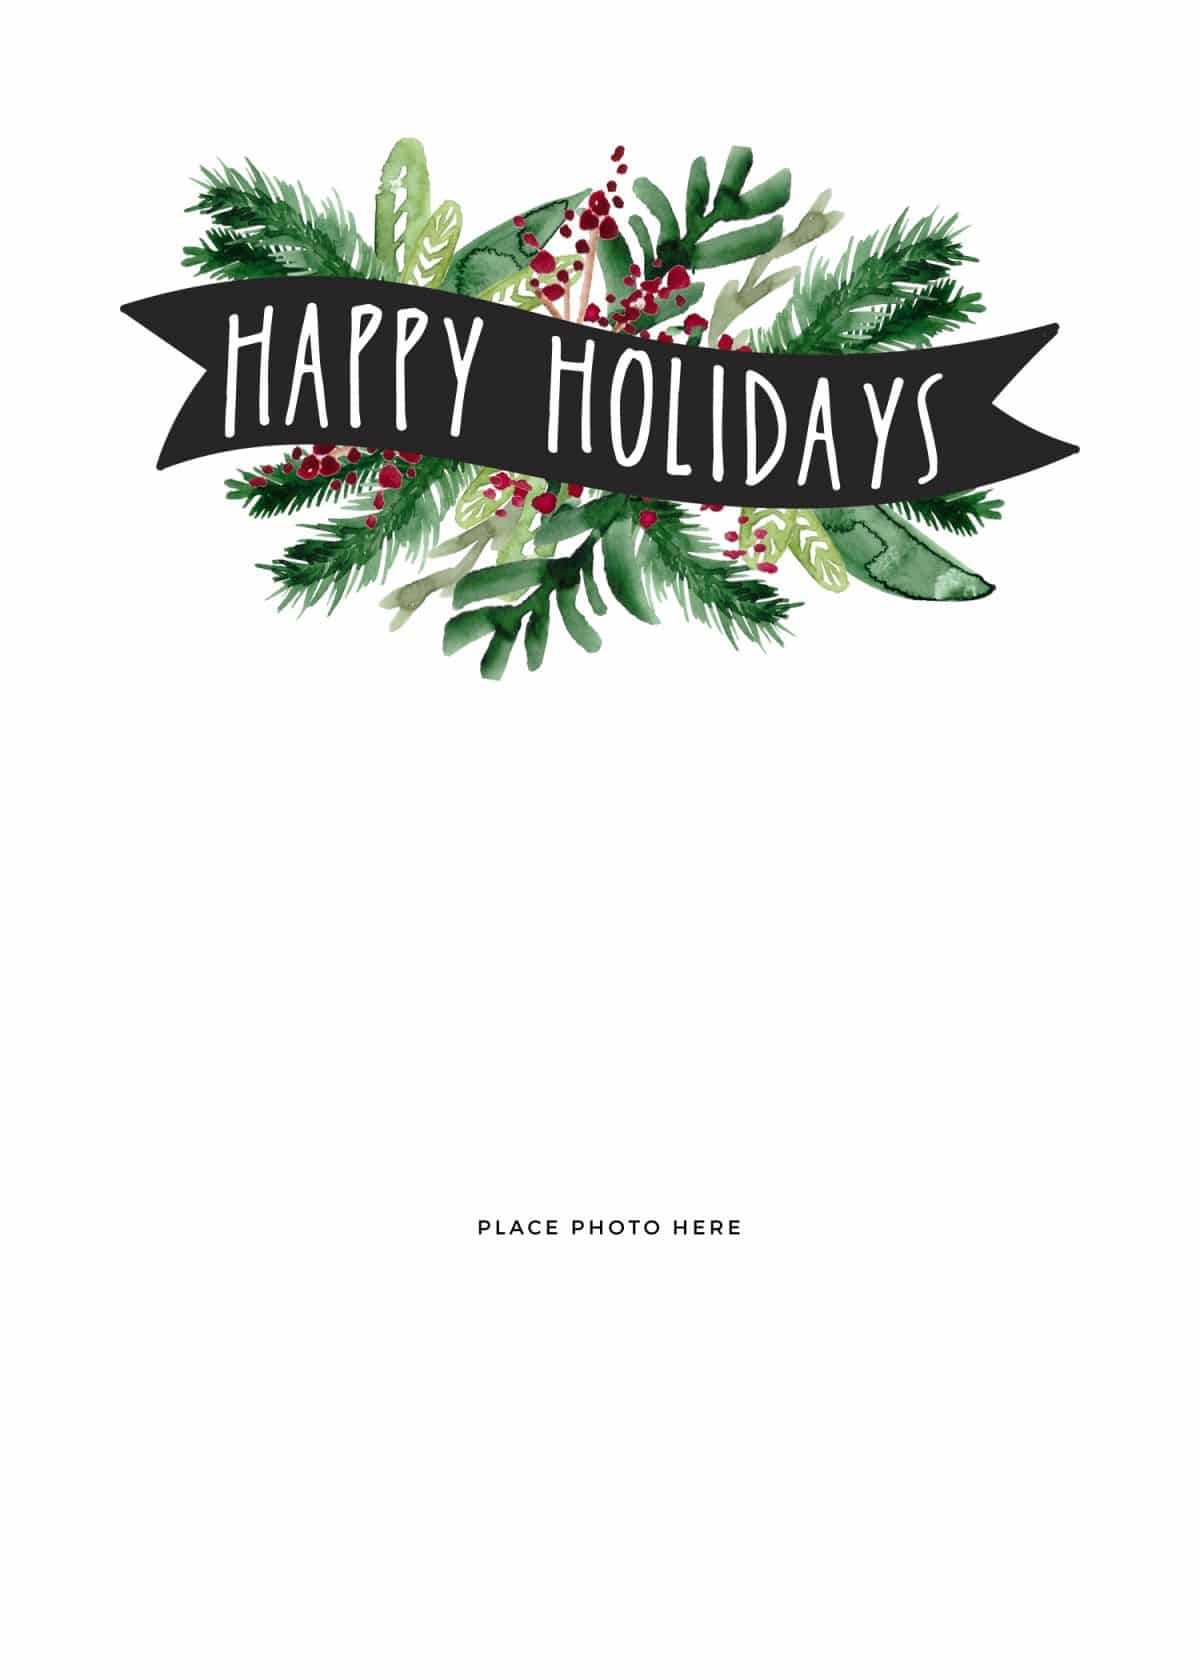 Make Your Own Photo Christmas Cards (For Free!) – Somewhat With Free Holiday Photo Card Templates